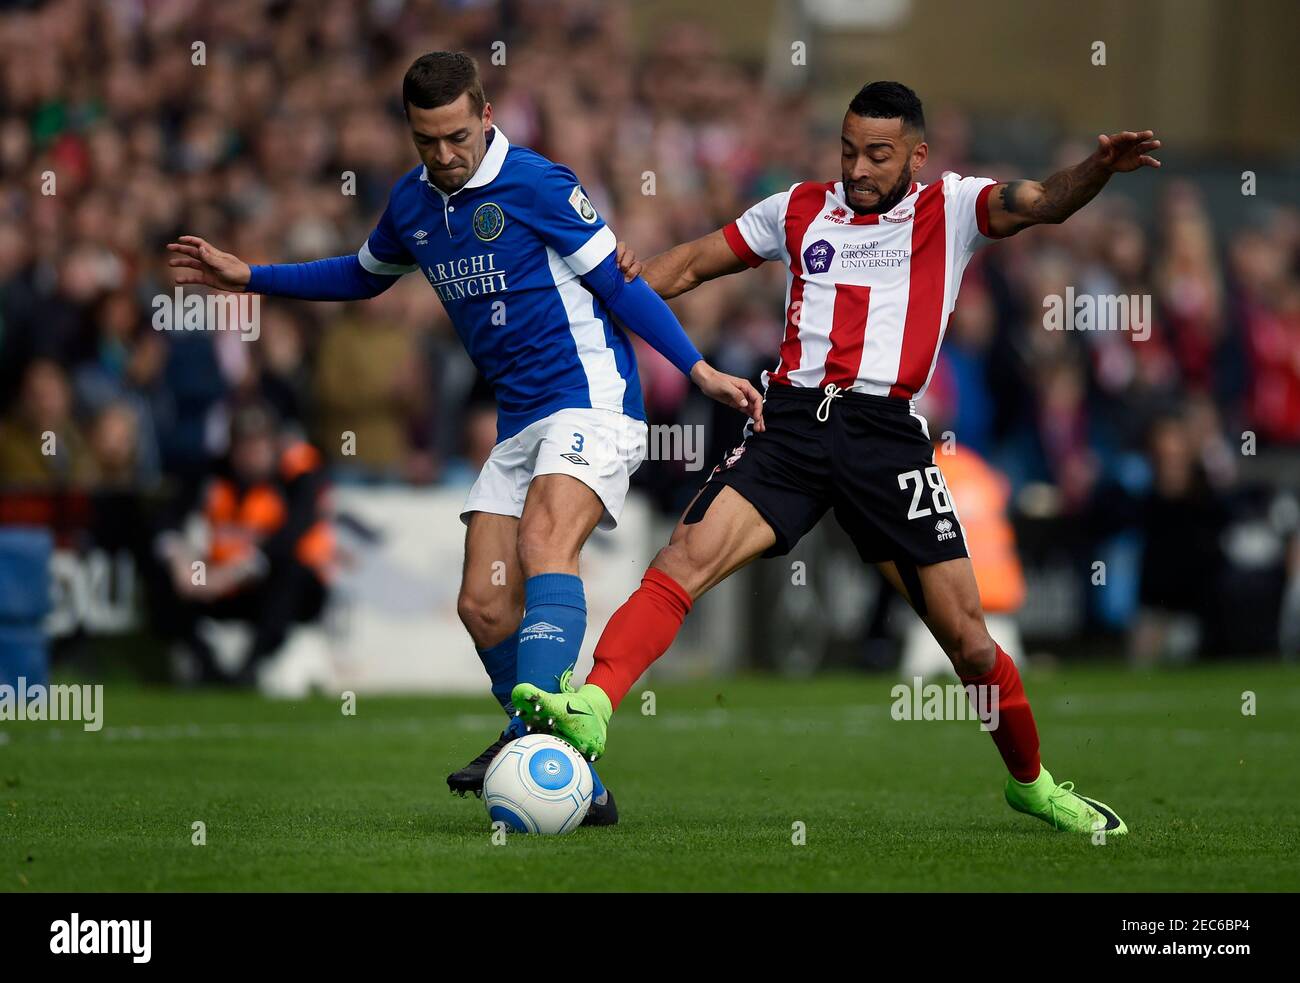 Britain Soccer Football - Lincoln City v Macclesfield Town - Vanarama  National League - Sincil Bank - 22/4/17 Lincoln City's Nathan Arnold in  action with Macclesfield Town's David Fitzpatrick Mandatory Credit: Action